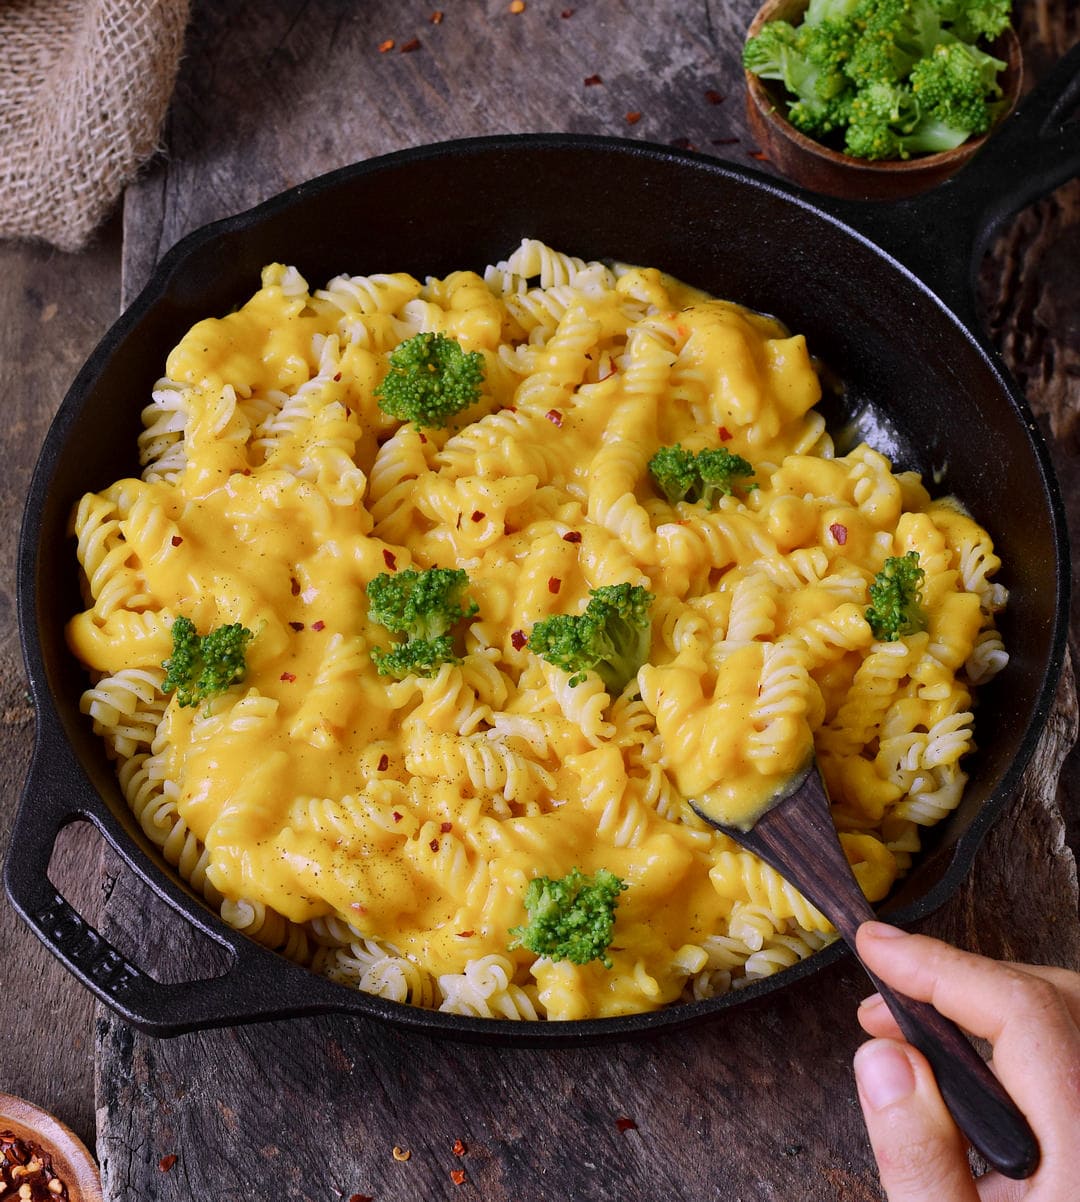 Healthy vegan Mac and Cheese with gluten-free pasta in a black skillet